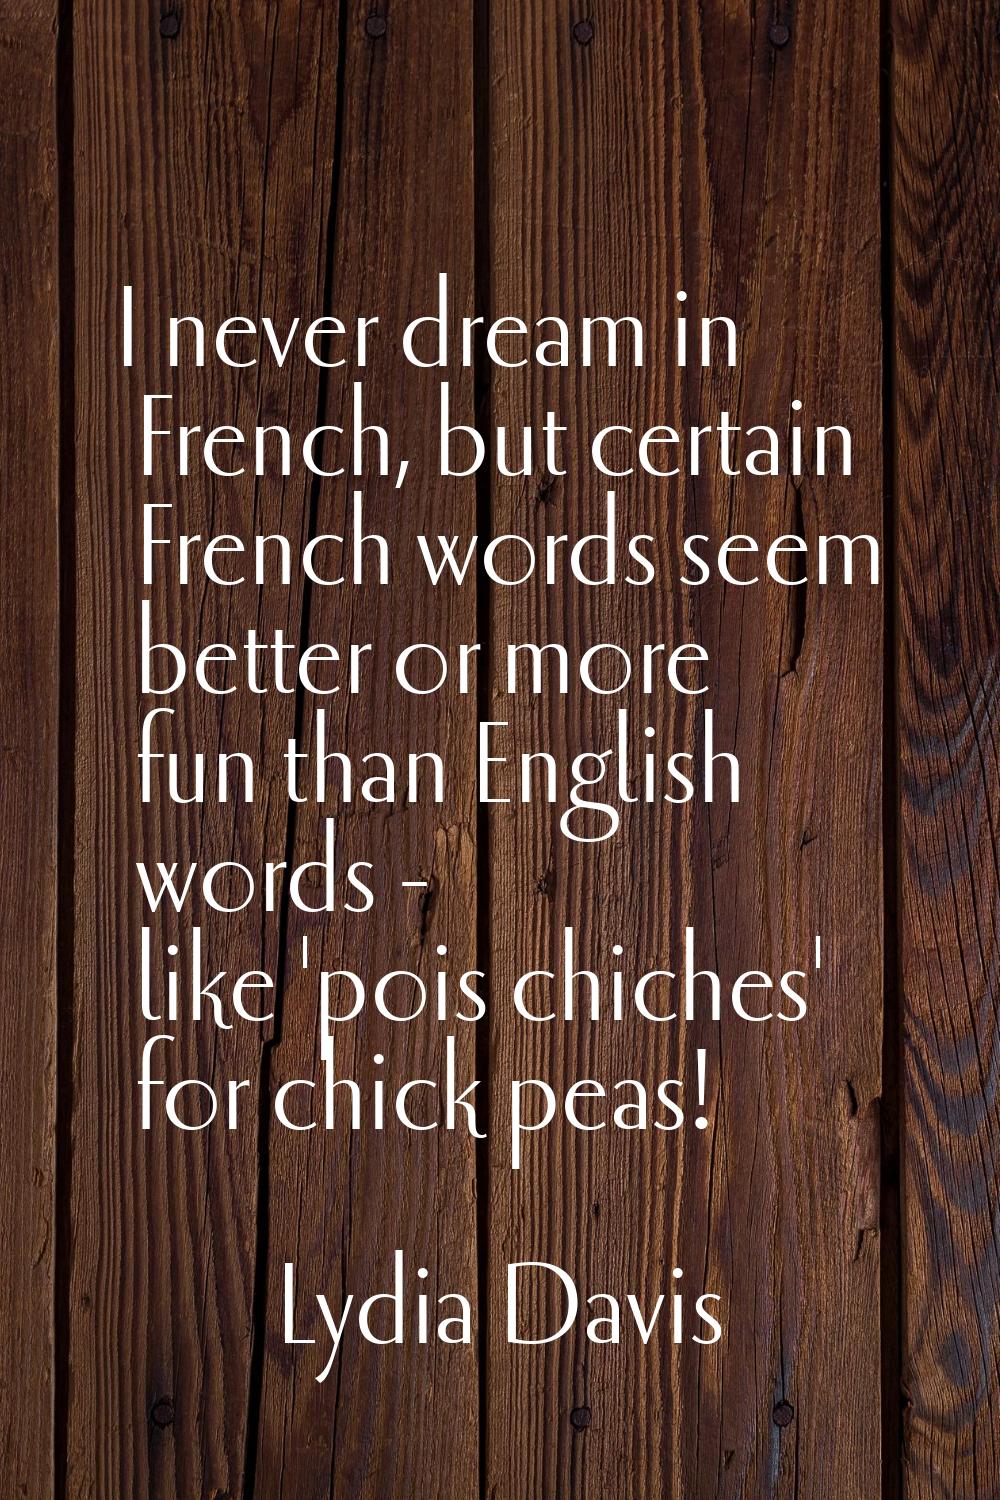 I never dream in French, but certain French words seem better or more fun than English words - like